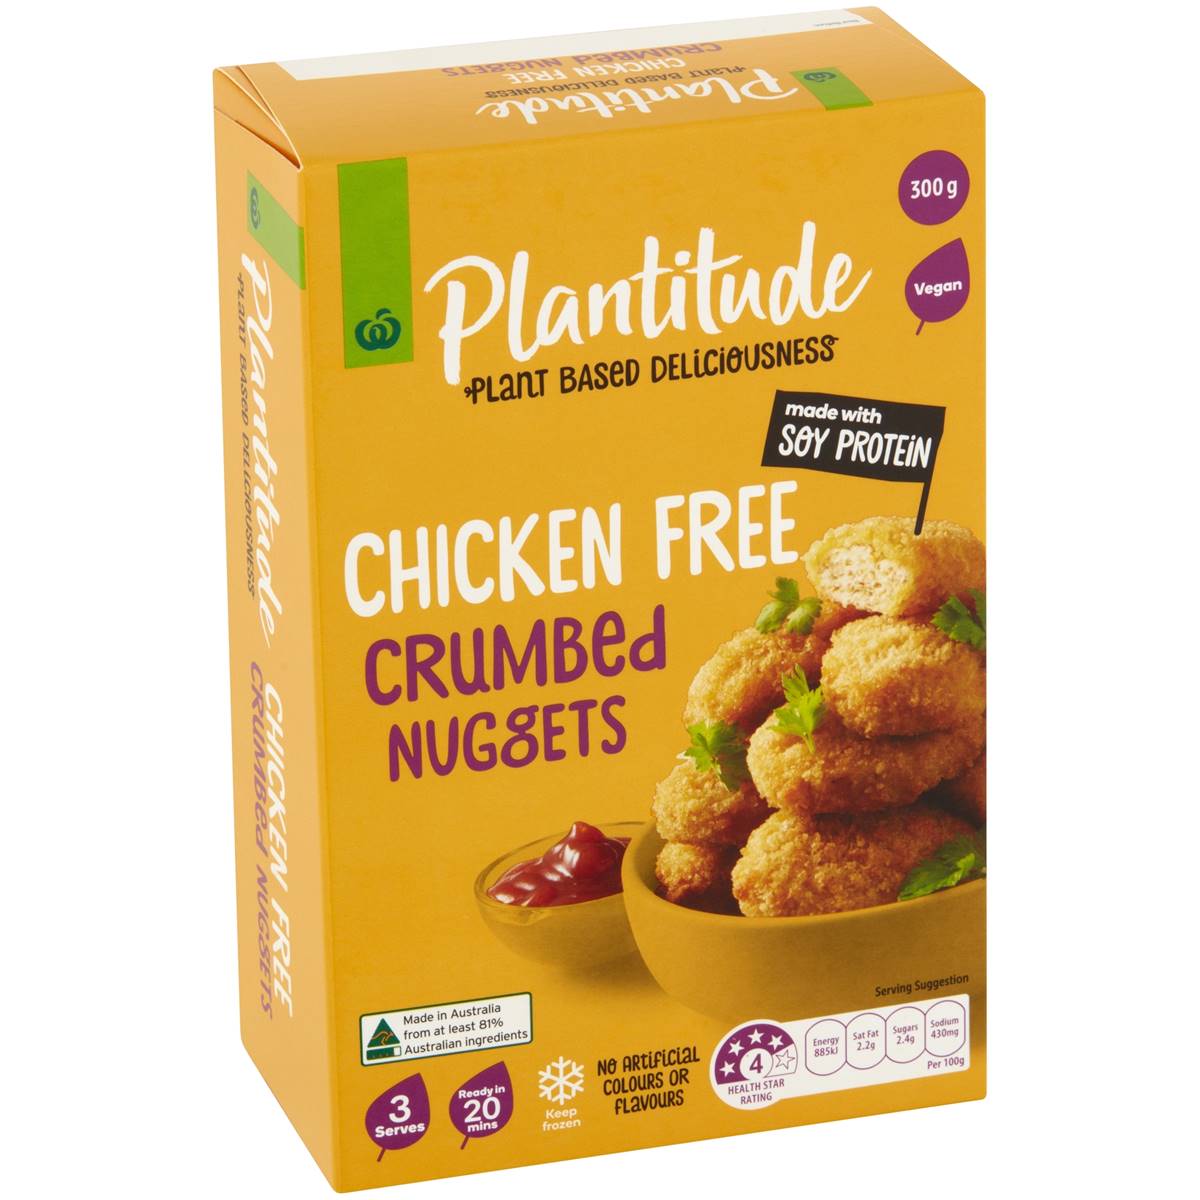 Calories in Woolworths Plantitude Chicken Free Crumbed Nuggets